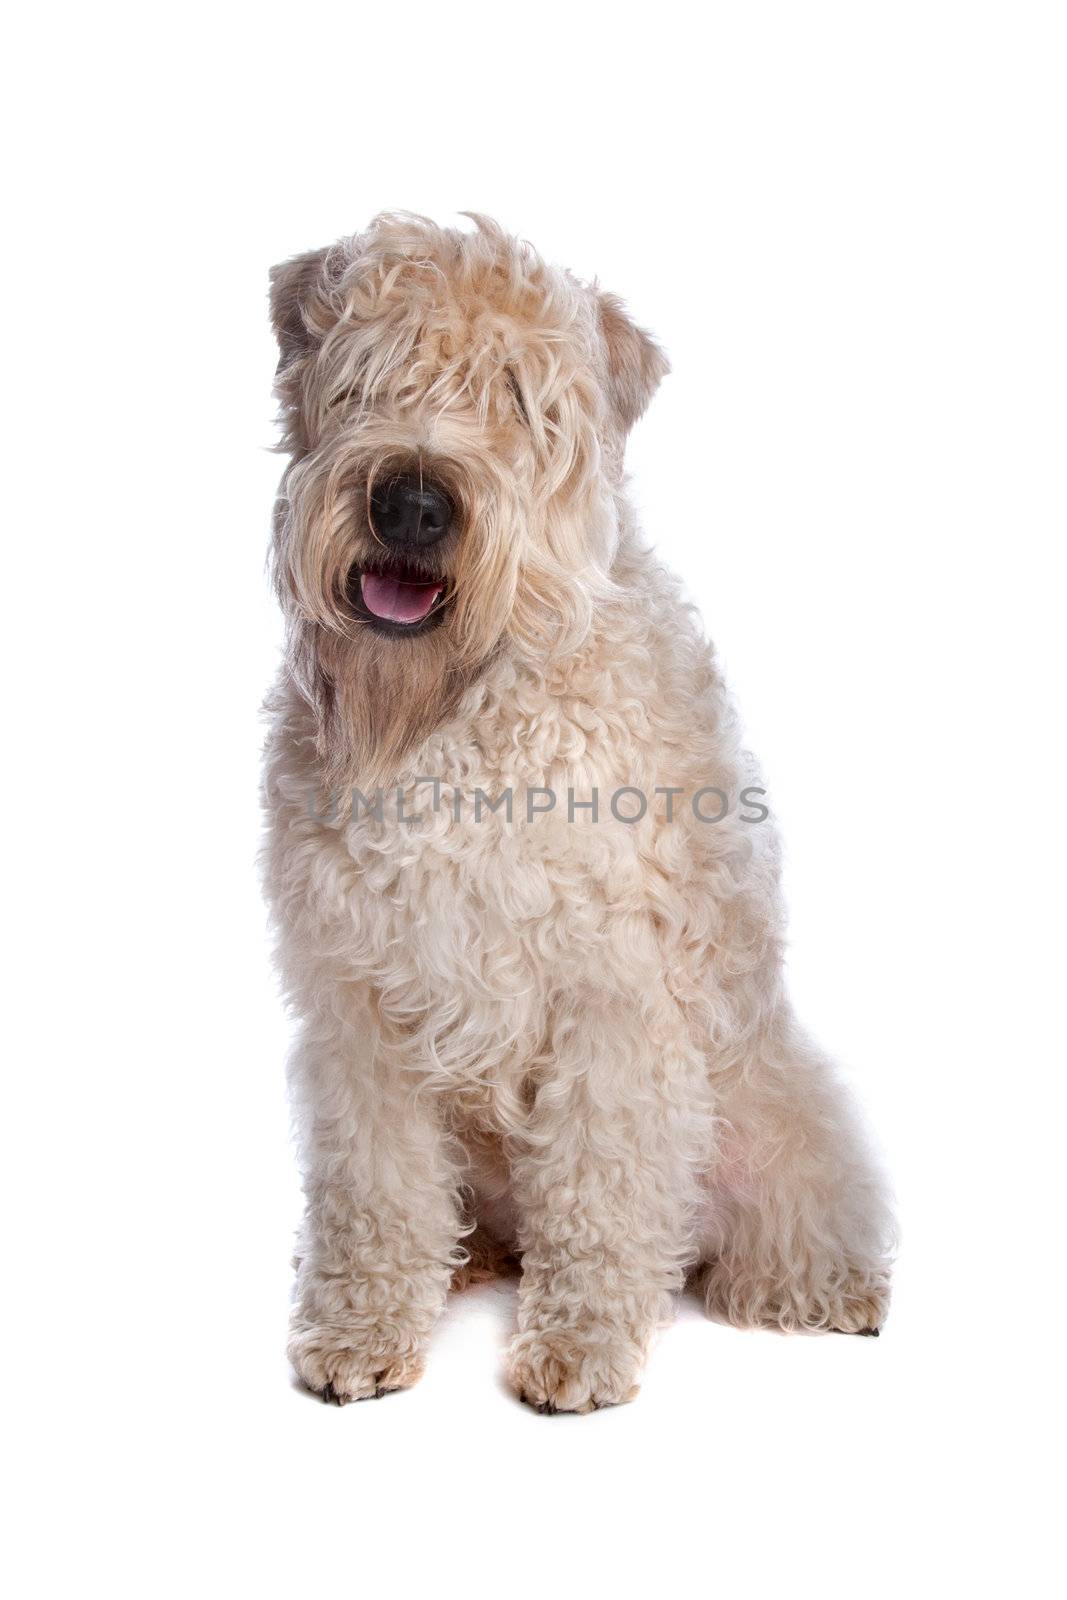 Soft Coated Wheaten Terrier dog sitting isolated on a white background